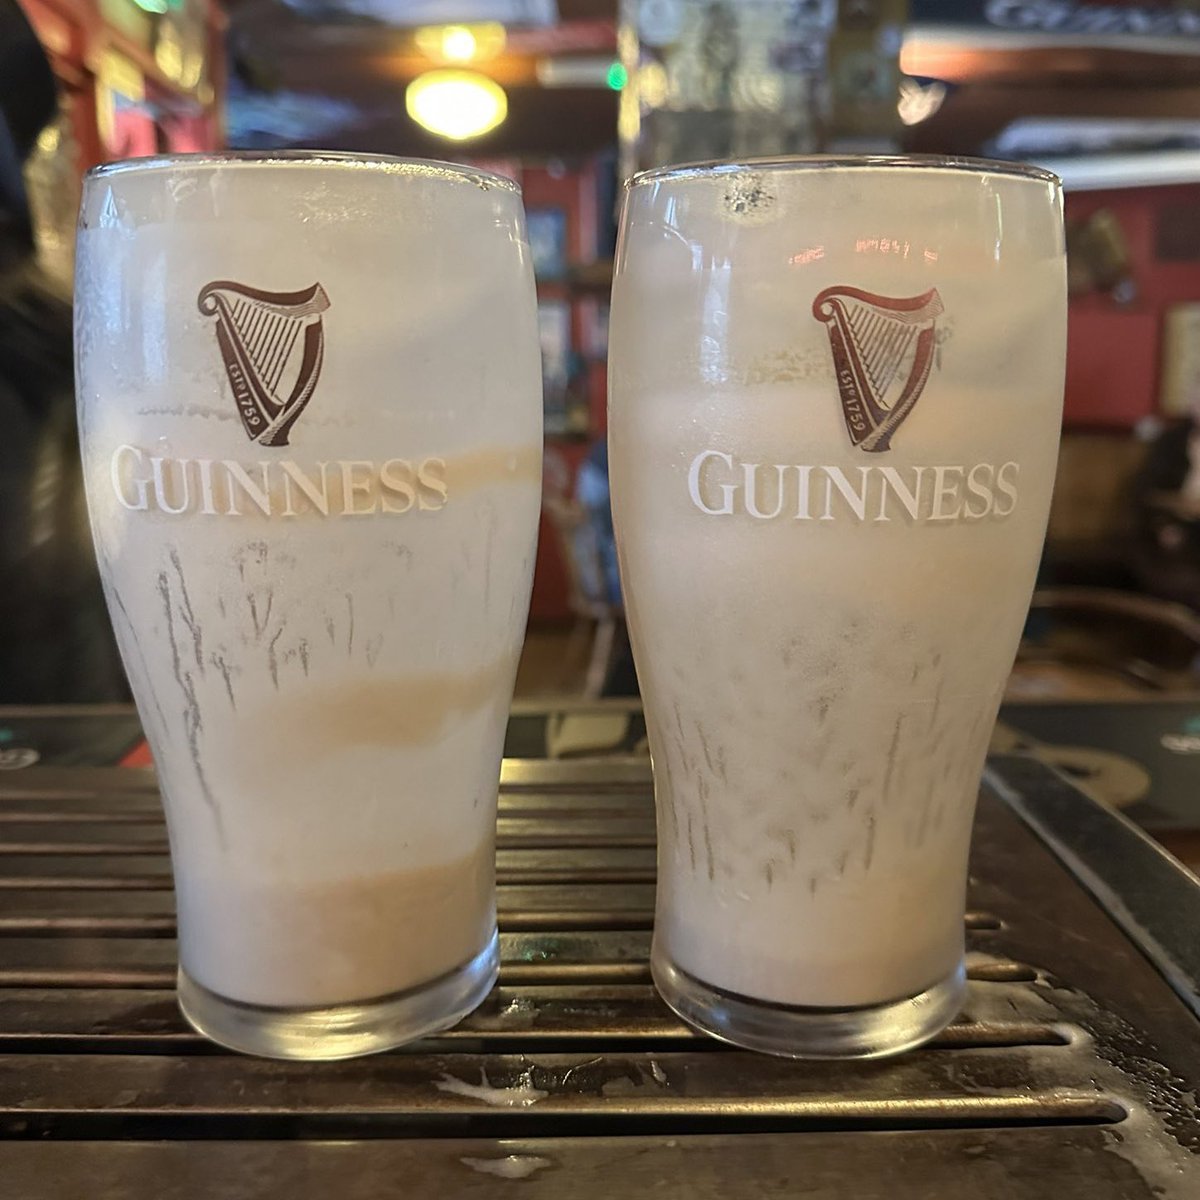 How the glass should look after a Guinness!☘️